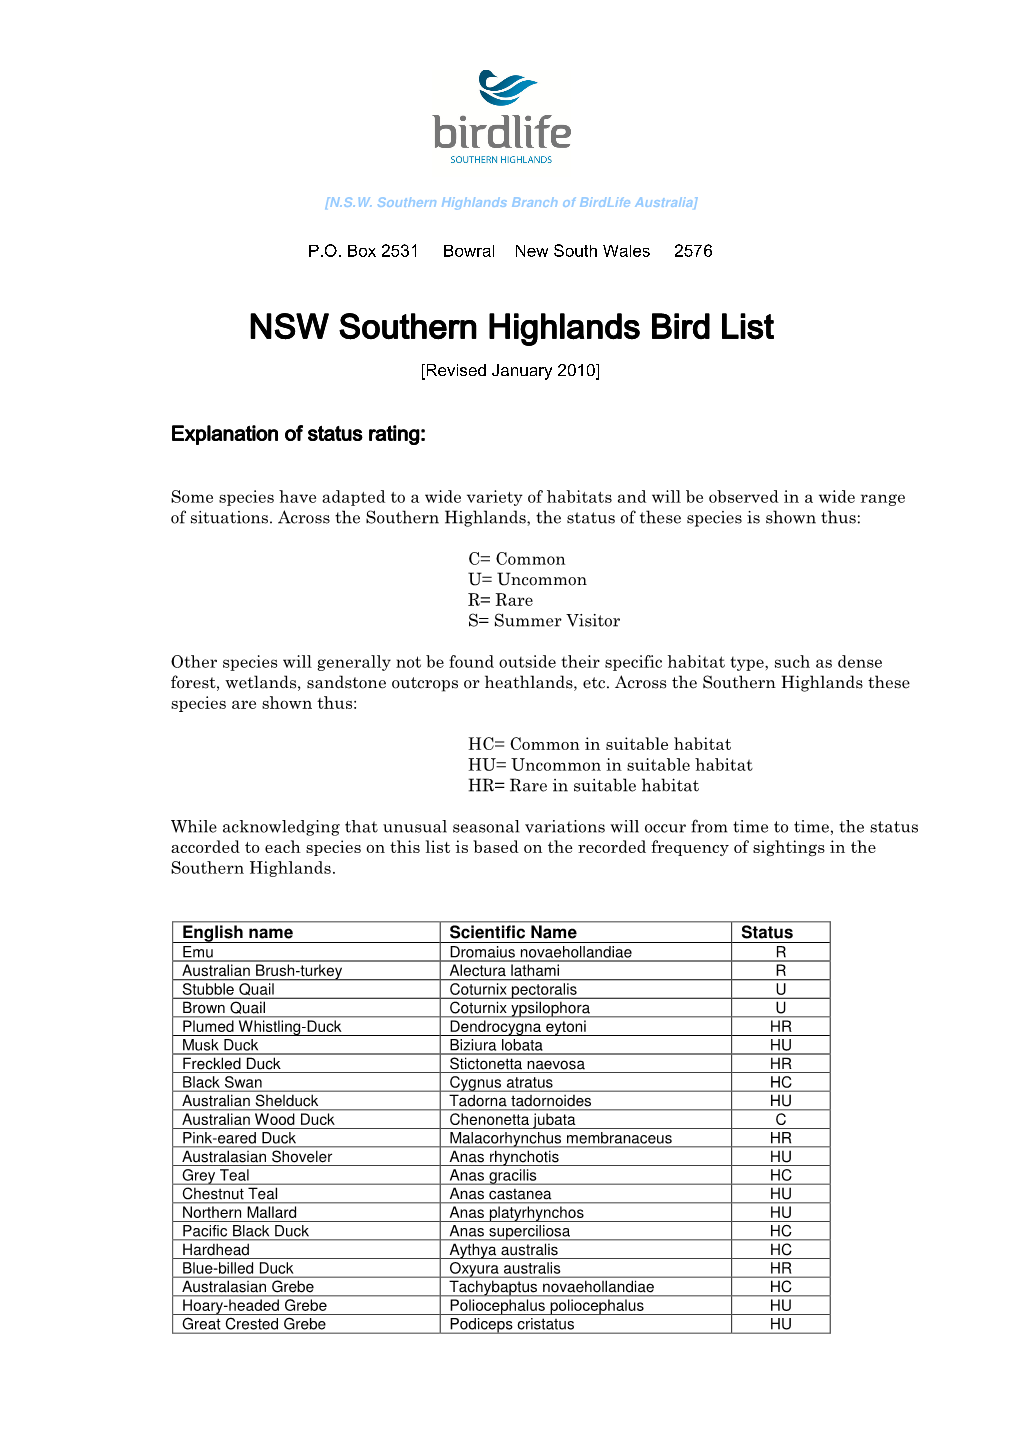 NSW Southern Highlands Bird NSW Southern